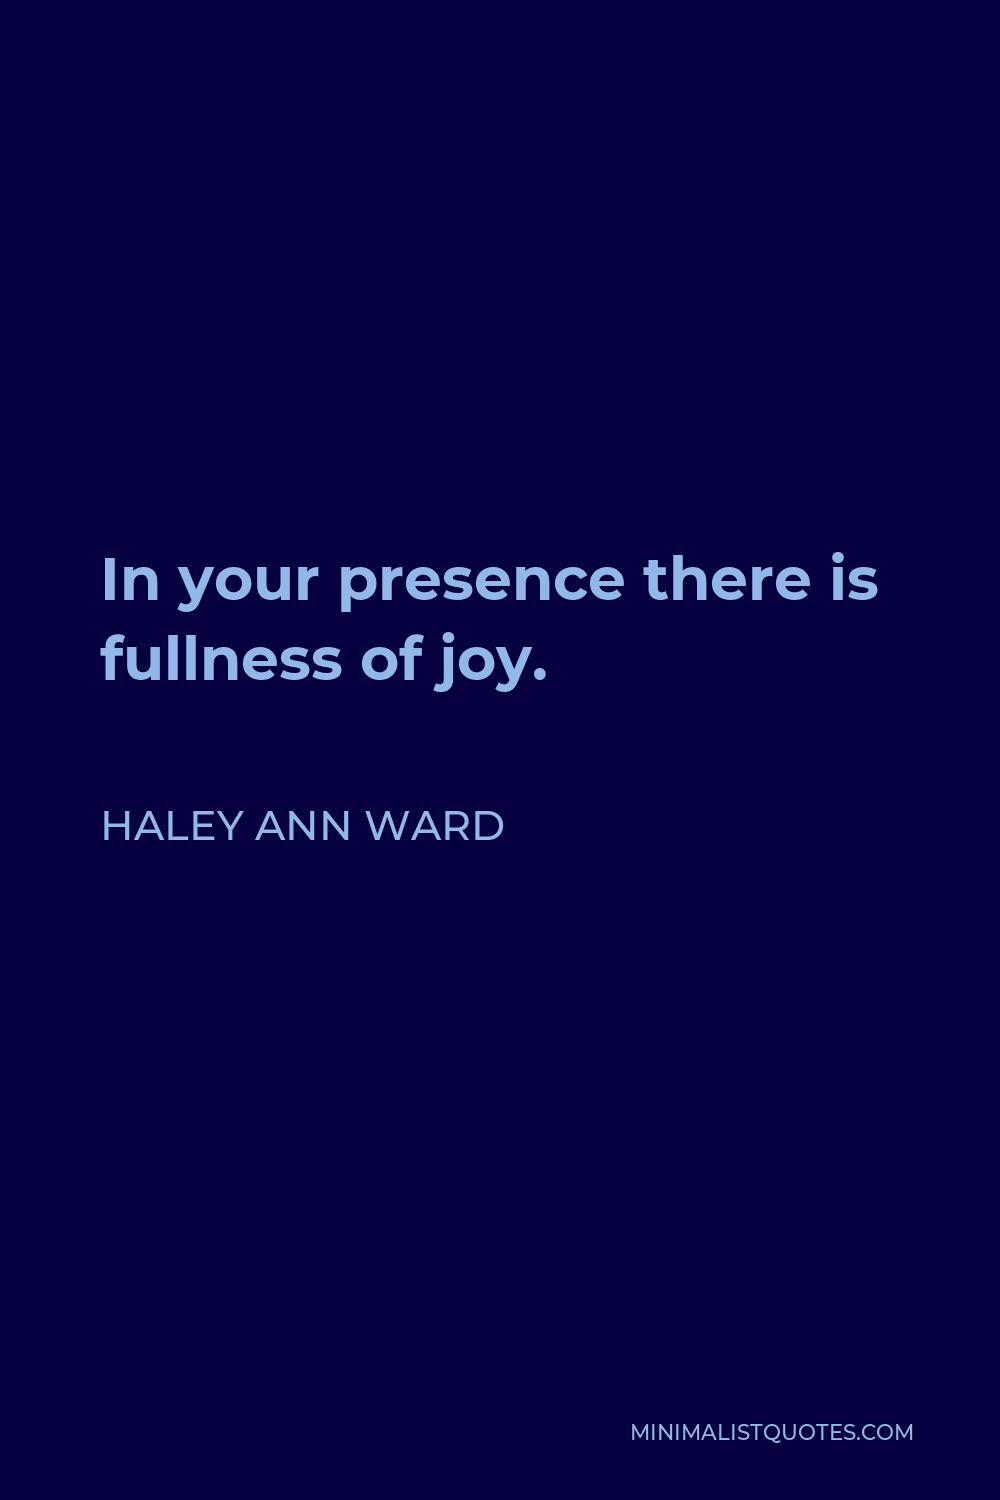 Haley Ann Ward Quote - In your presence there is fullness of joy.